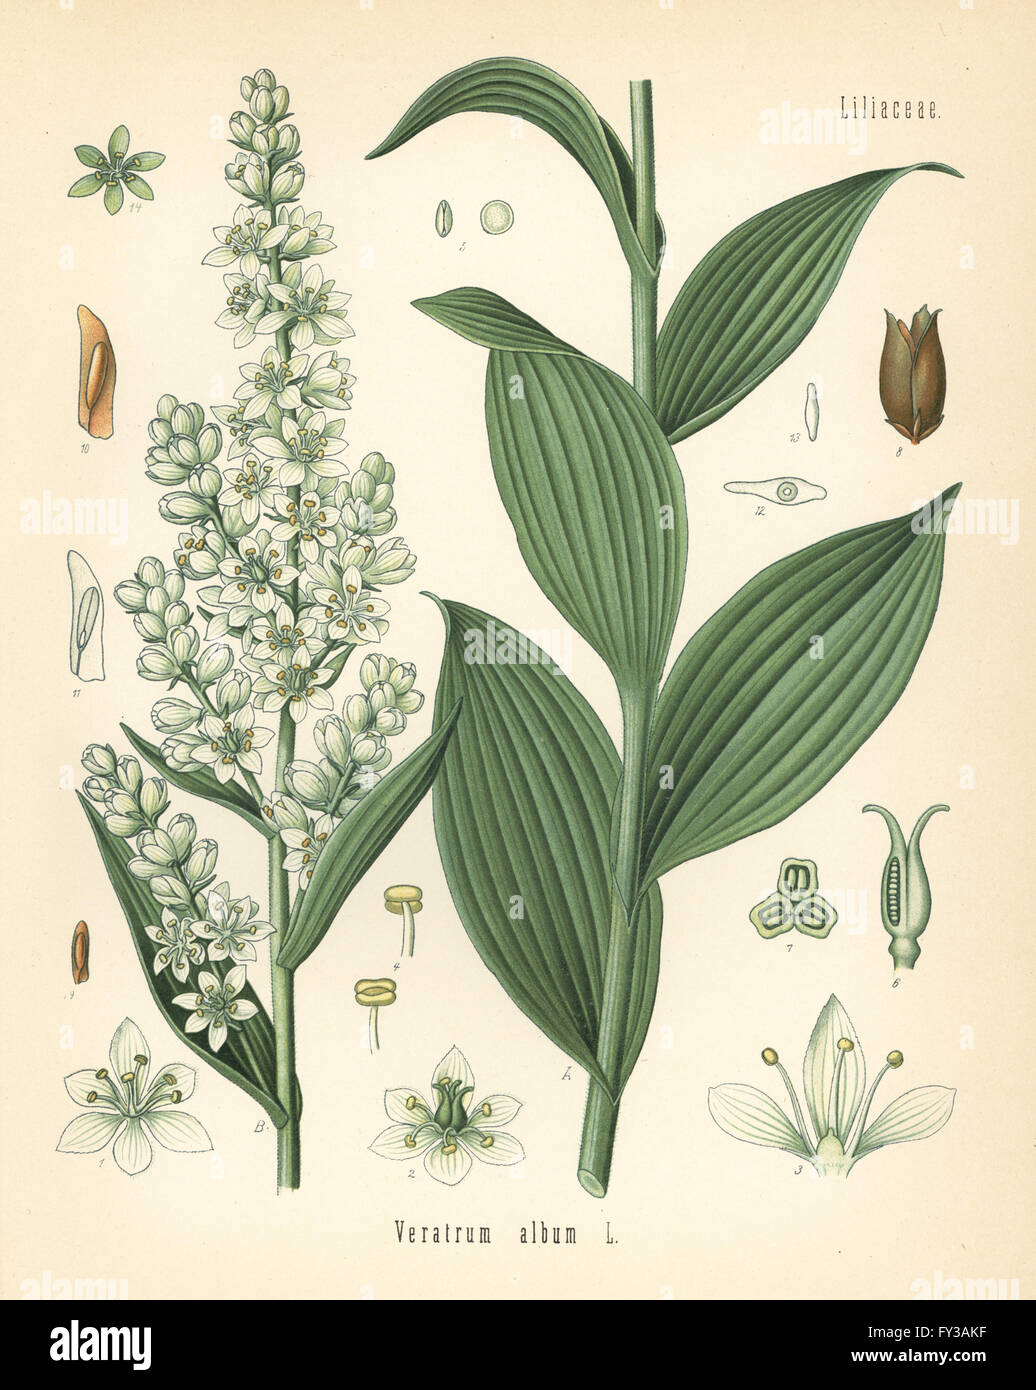 White hellebore, Veratrum album. Chromolithograph after a botanical illustration from Hermann Adolph Koehler's Medicinal Plants, edited by Gustav Pabst, Koehler, Germany, 1887. Stock Photo